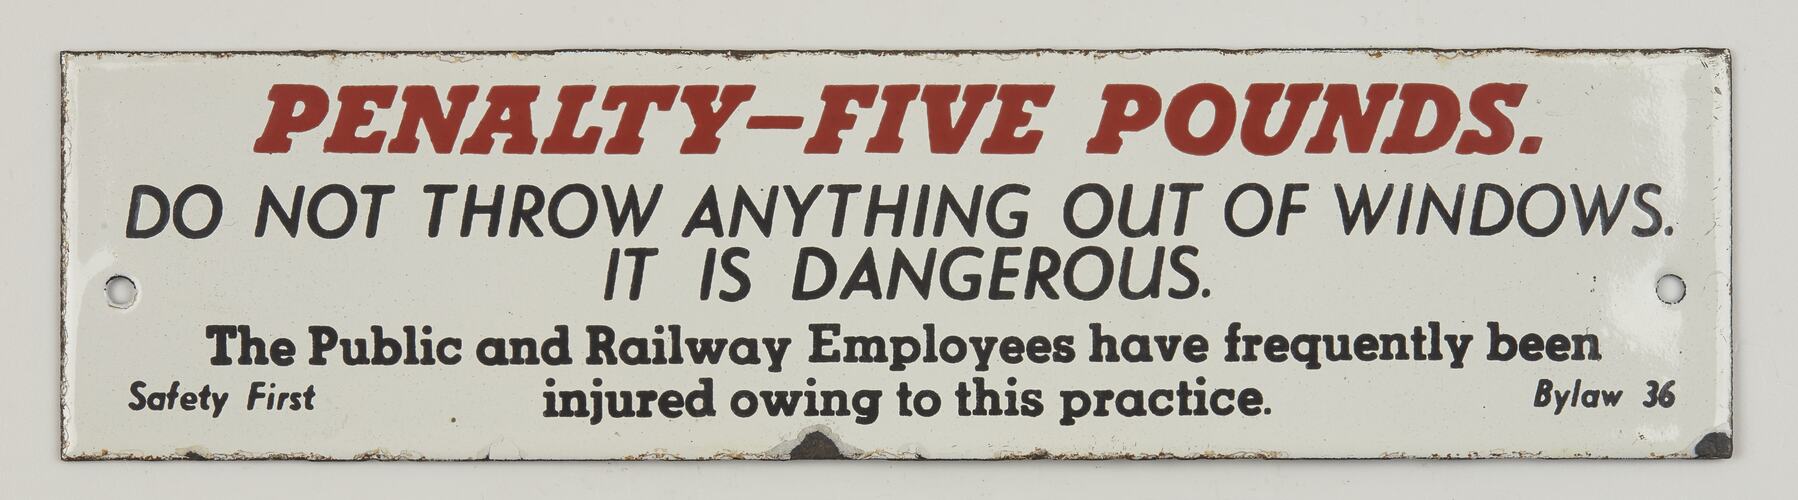 Sign - Victorian Railways, 'Penalty Five Pounds, Do Not Throw Anything Out of Windows...'